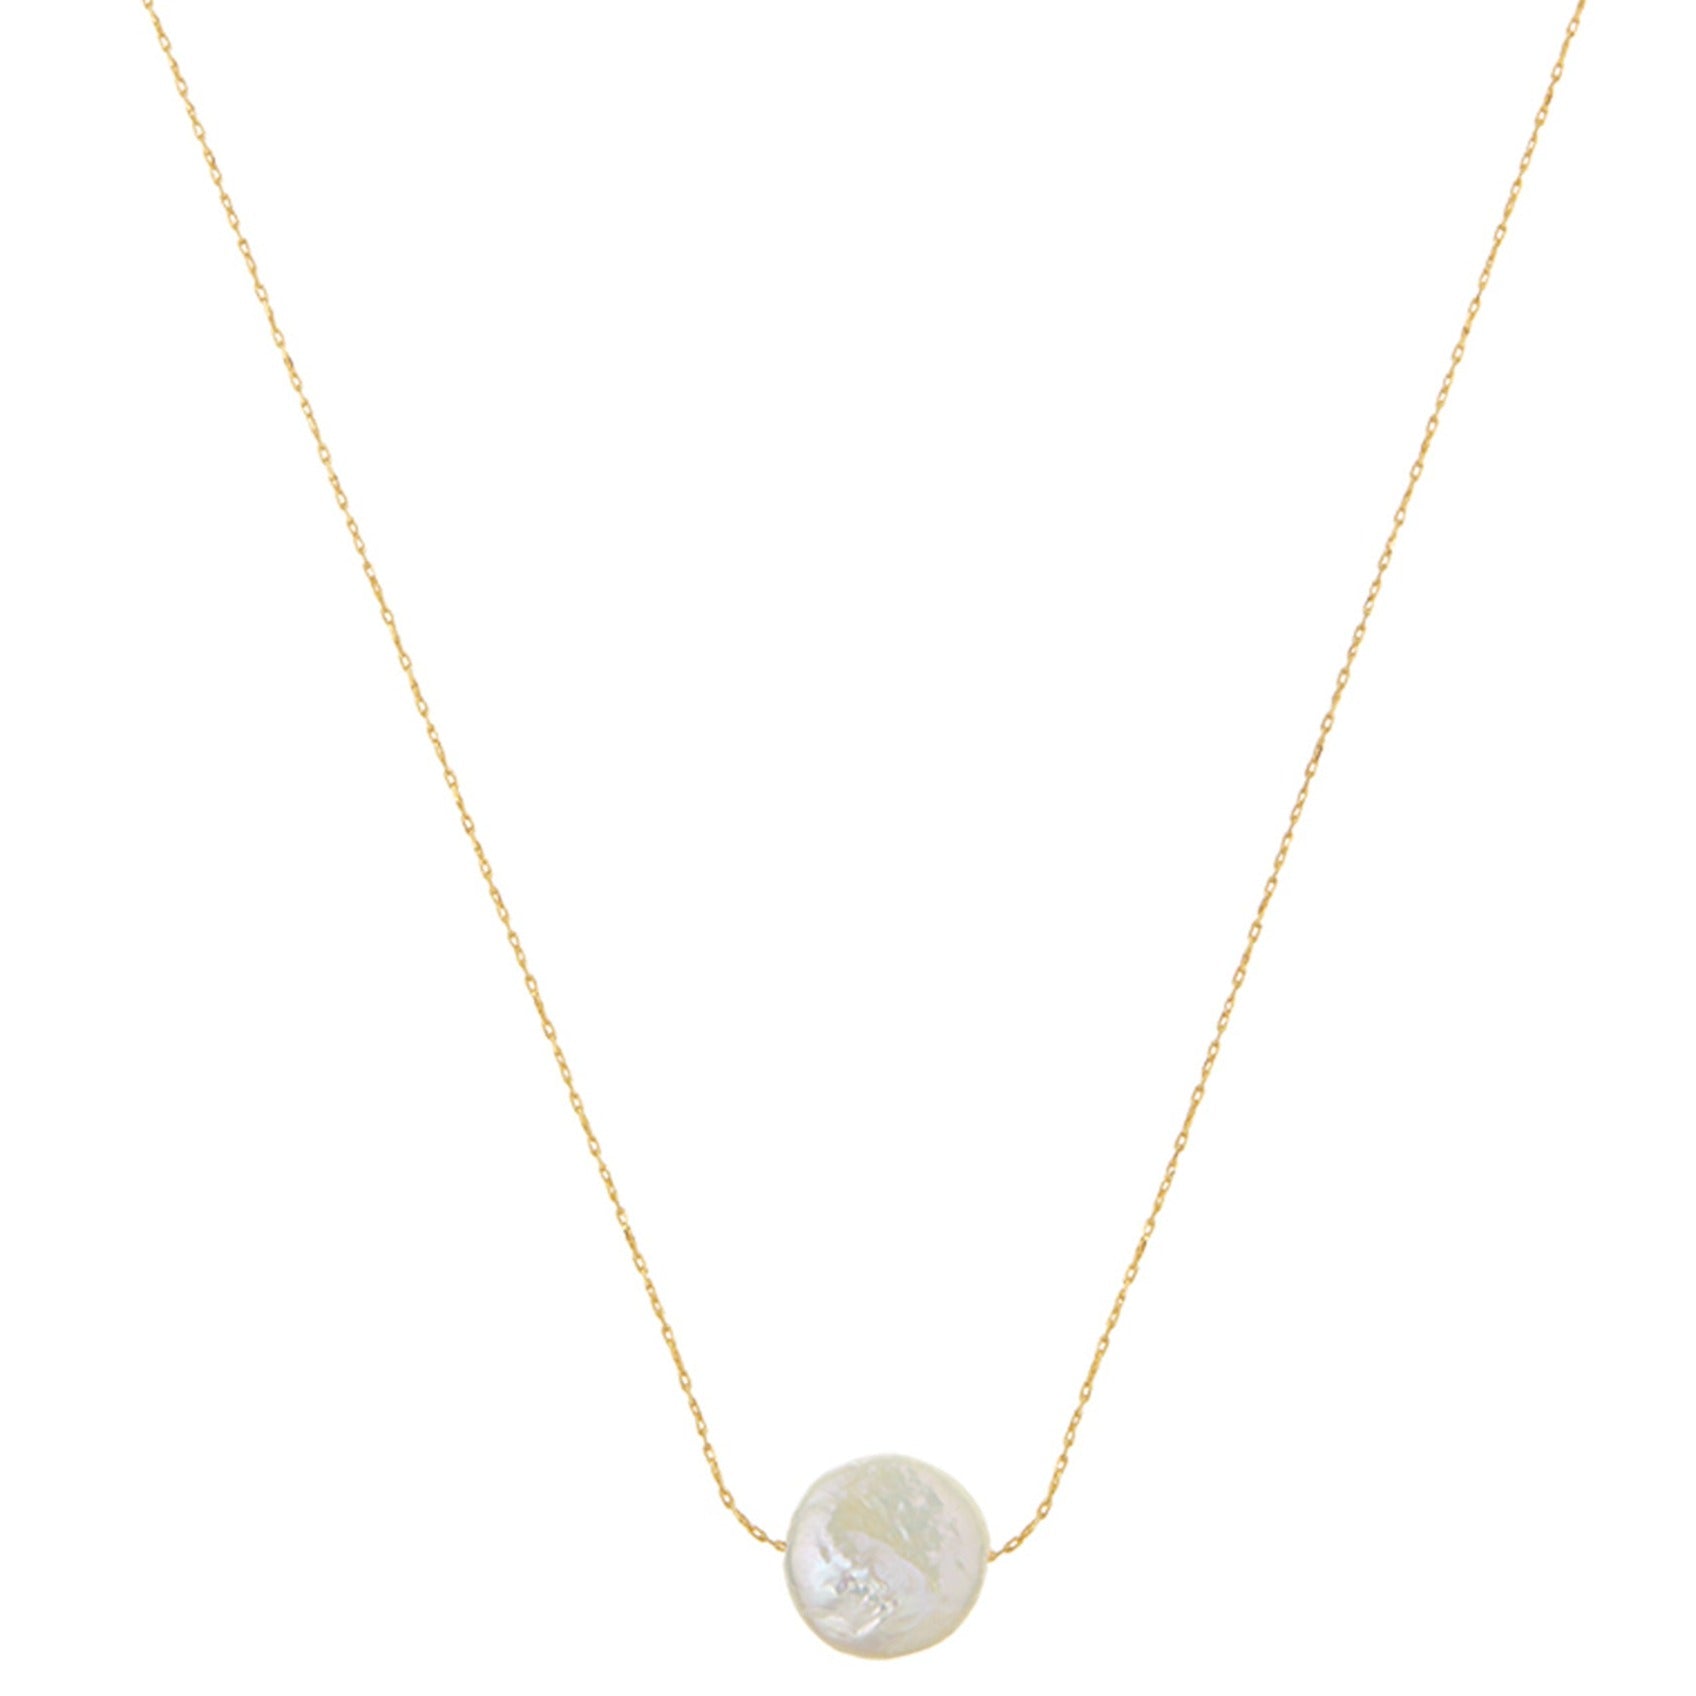 Stationed Flat Pearl Collar Necklace - Gold - Orelia London